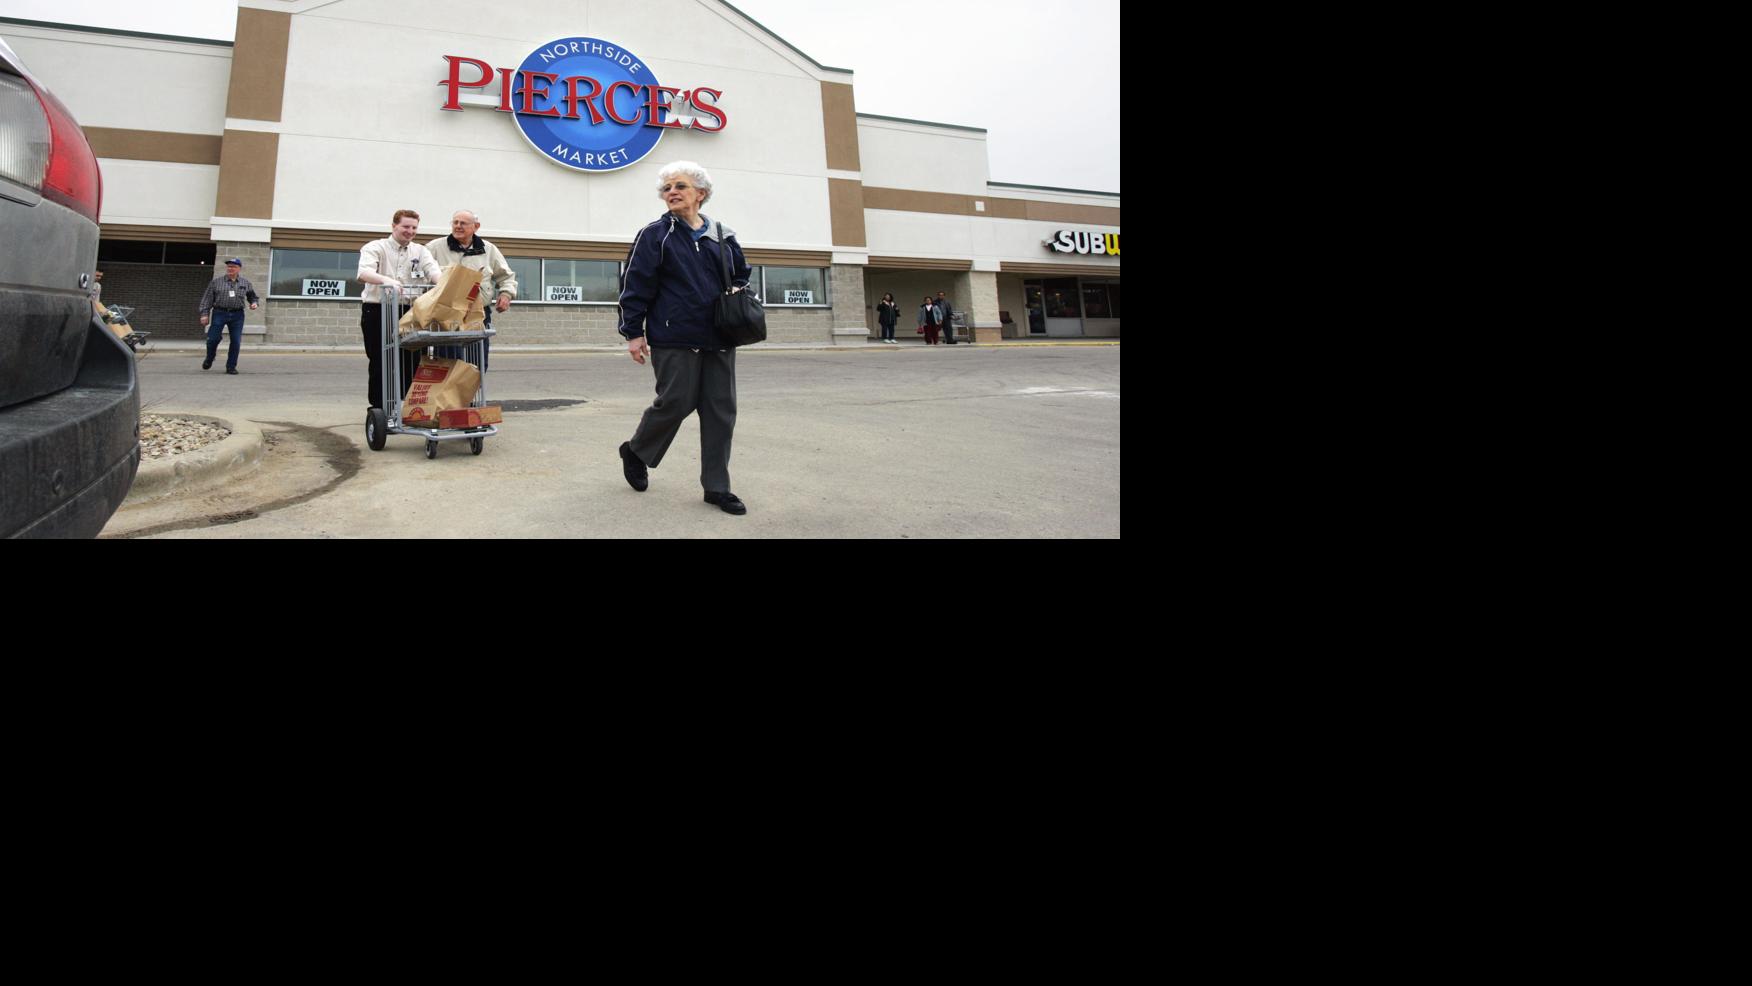 Festival Foods buys Pierce's Markets in West Baraboo and ...